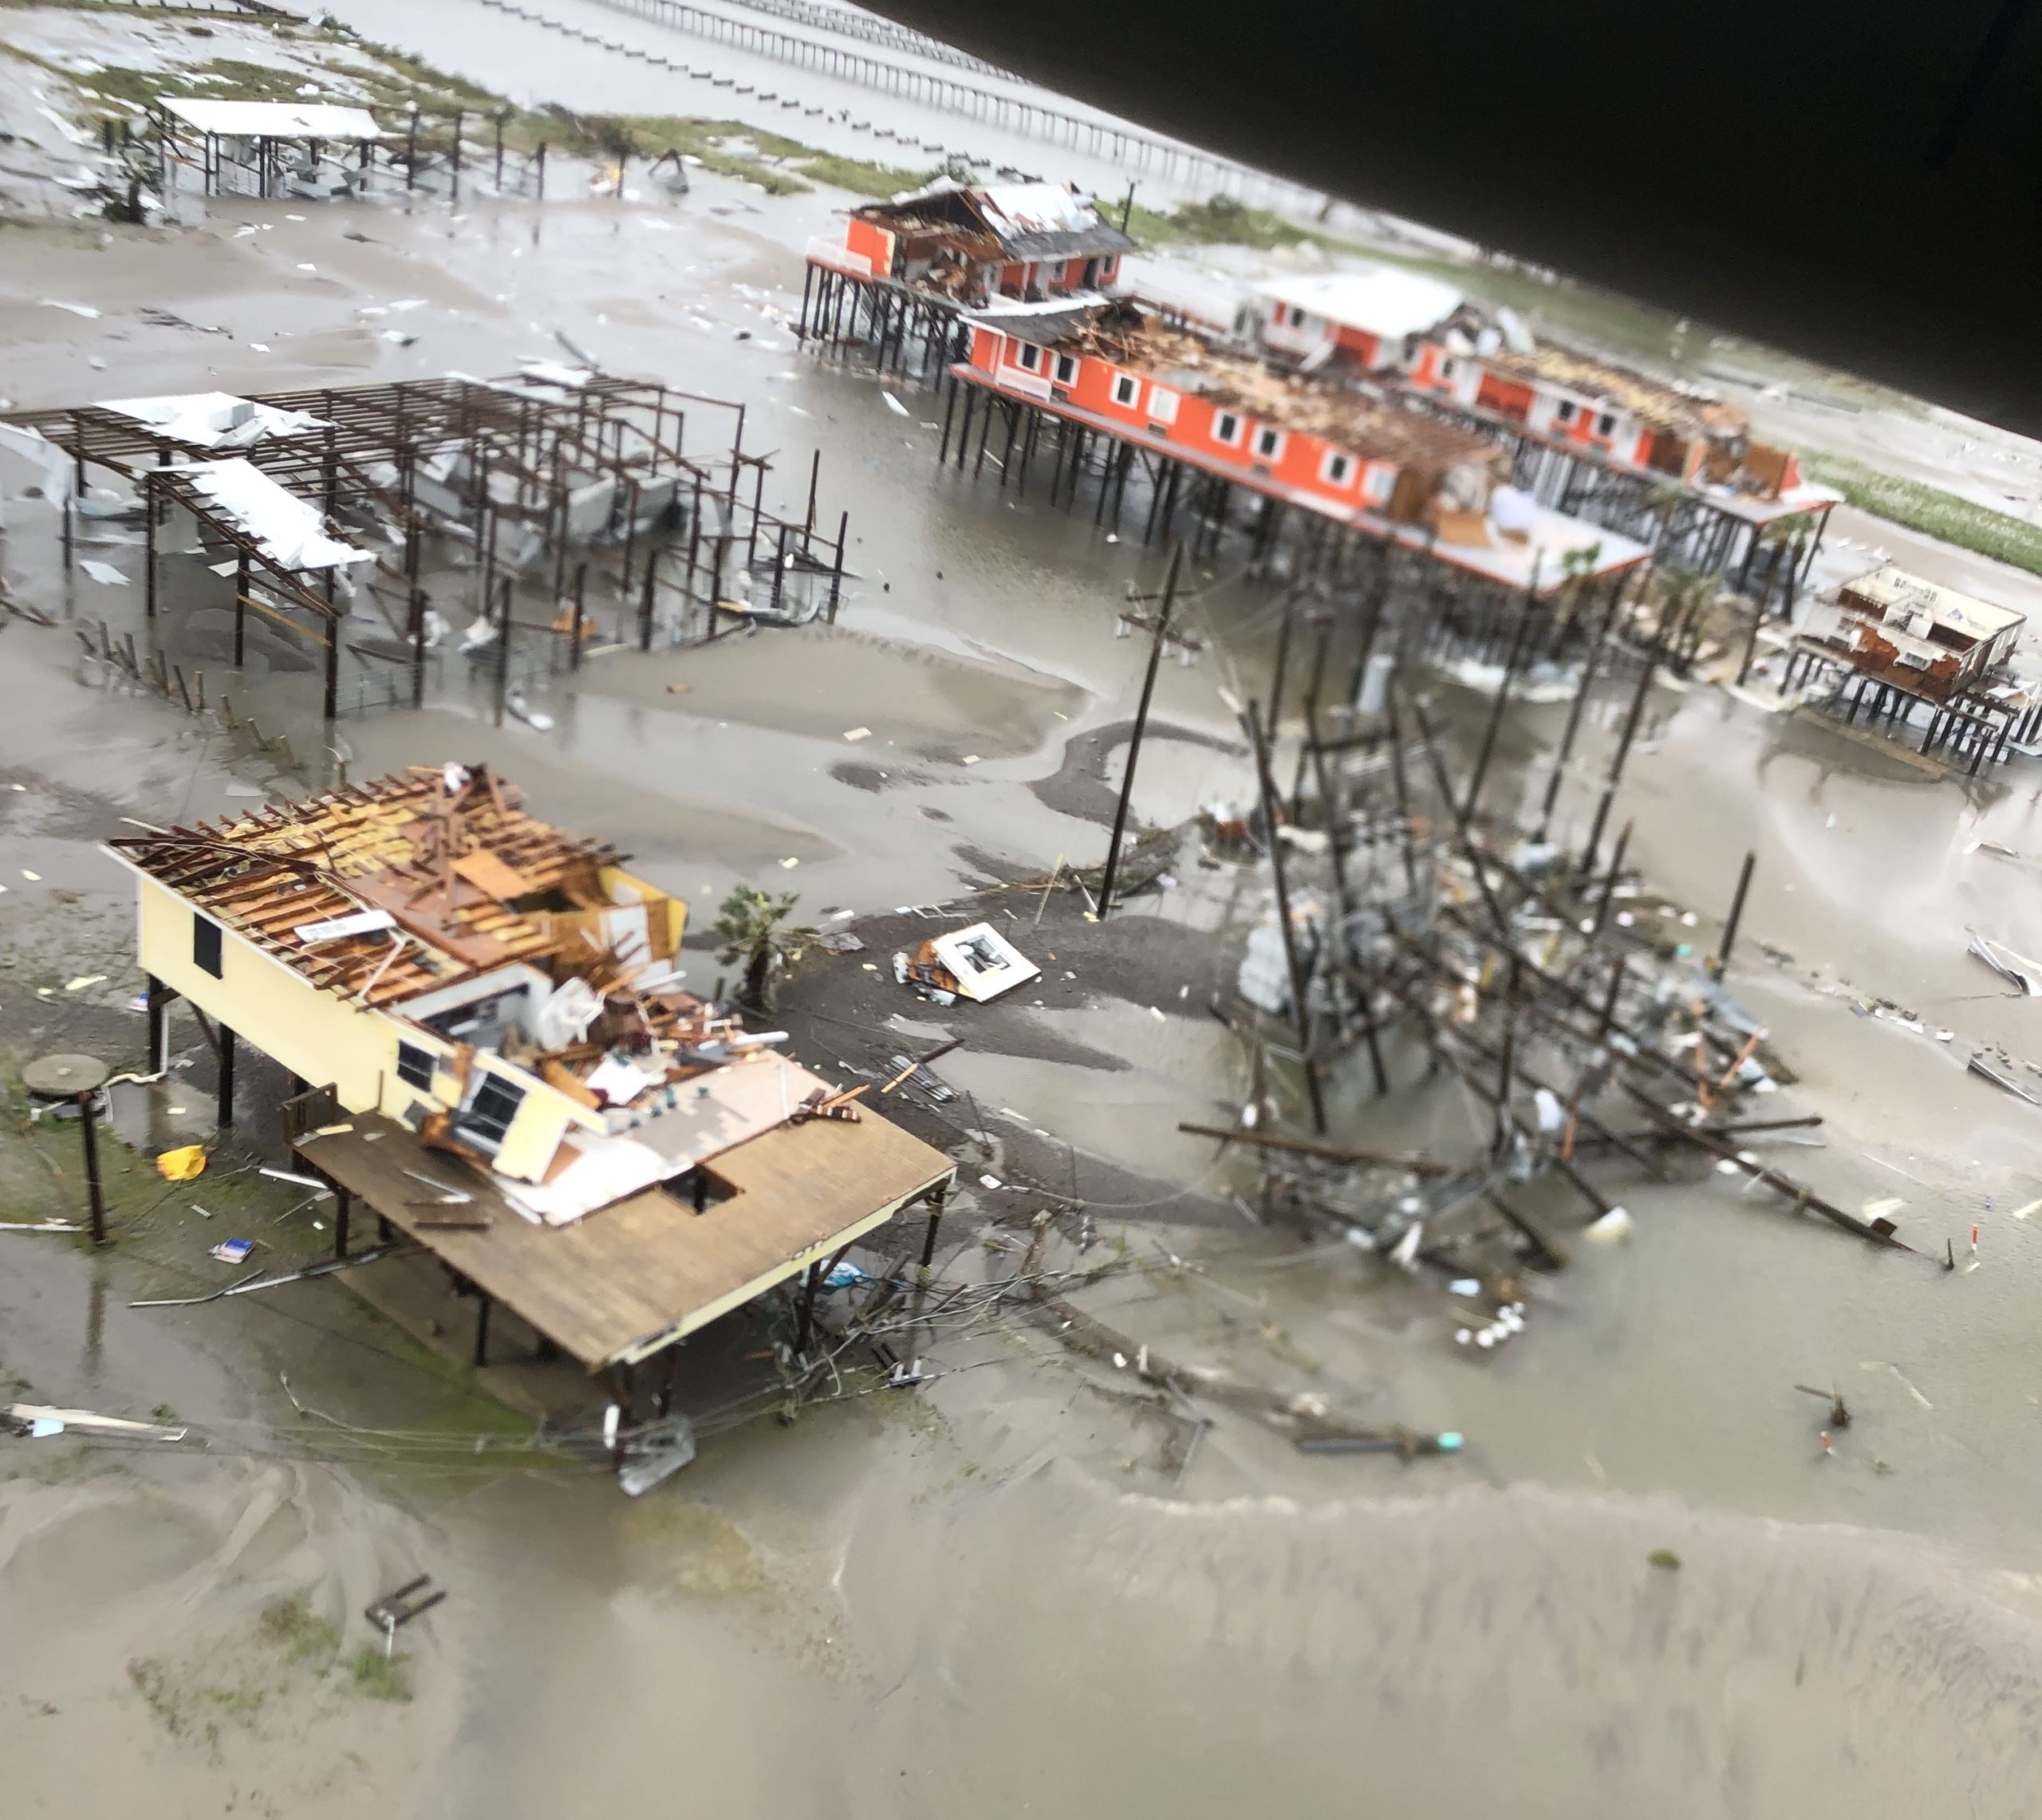 Photo taken from a helicopter showing homes damaged and destroyed by Hurricane Ida.